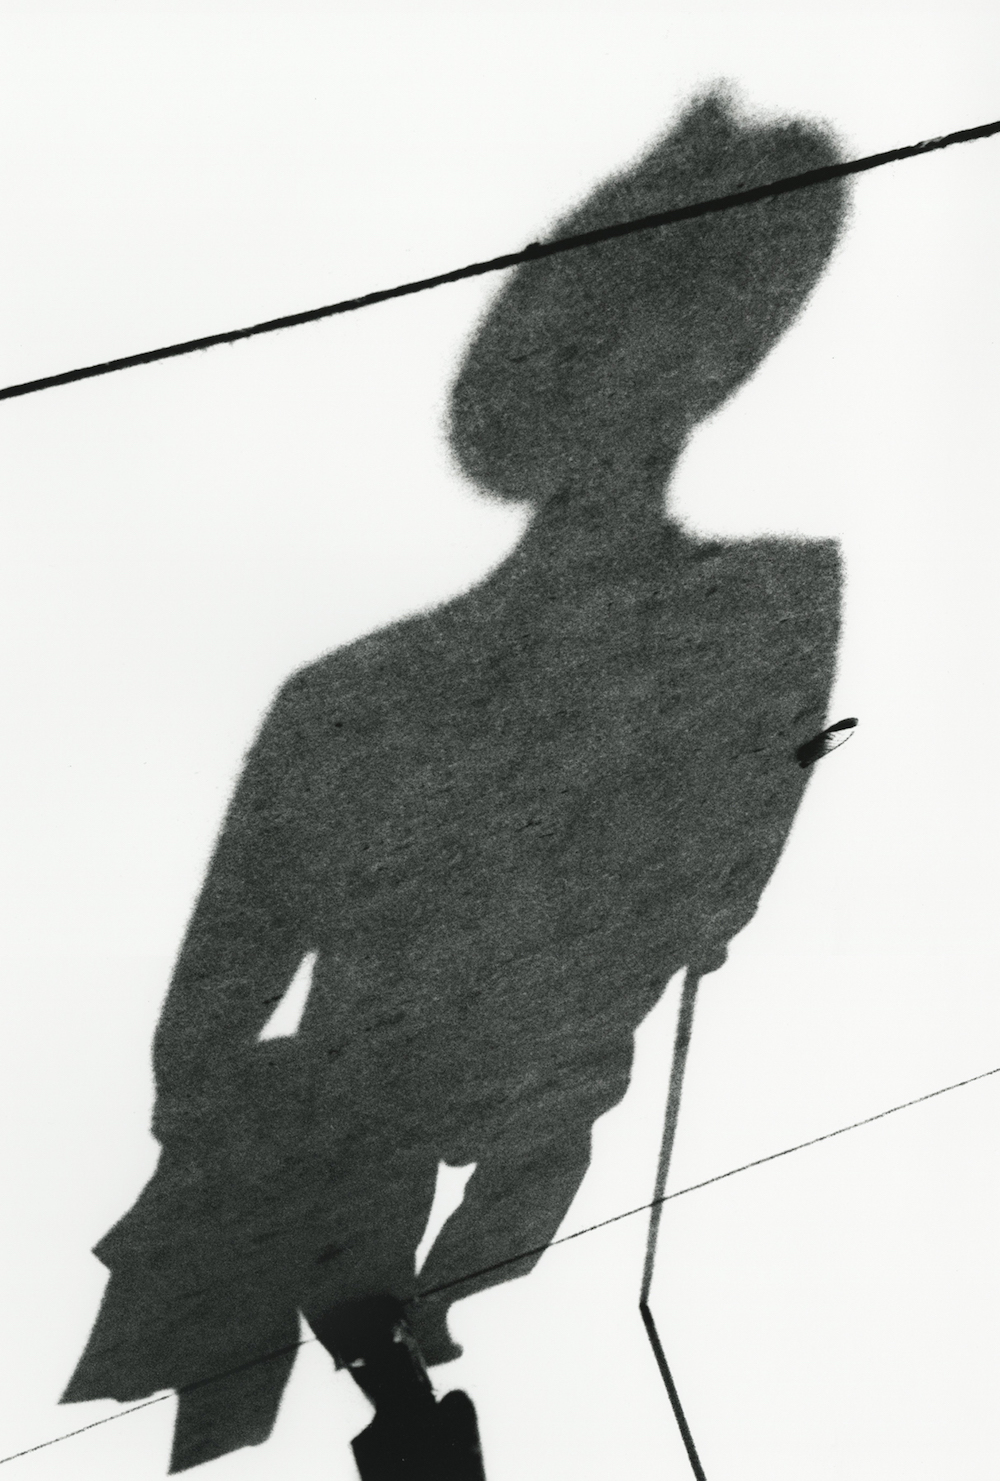 Man with Cane, Shadow Series, Chicago, 1951